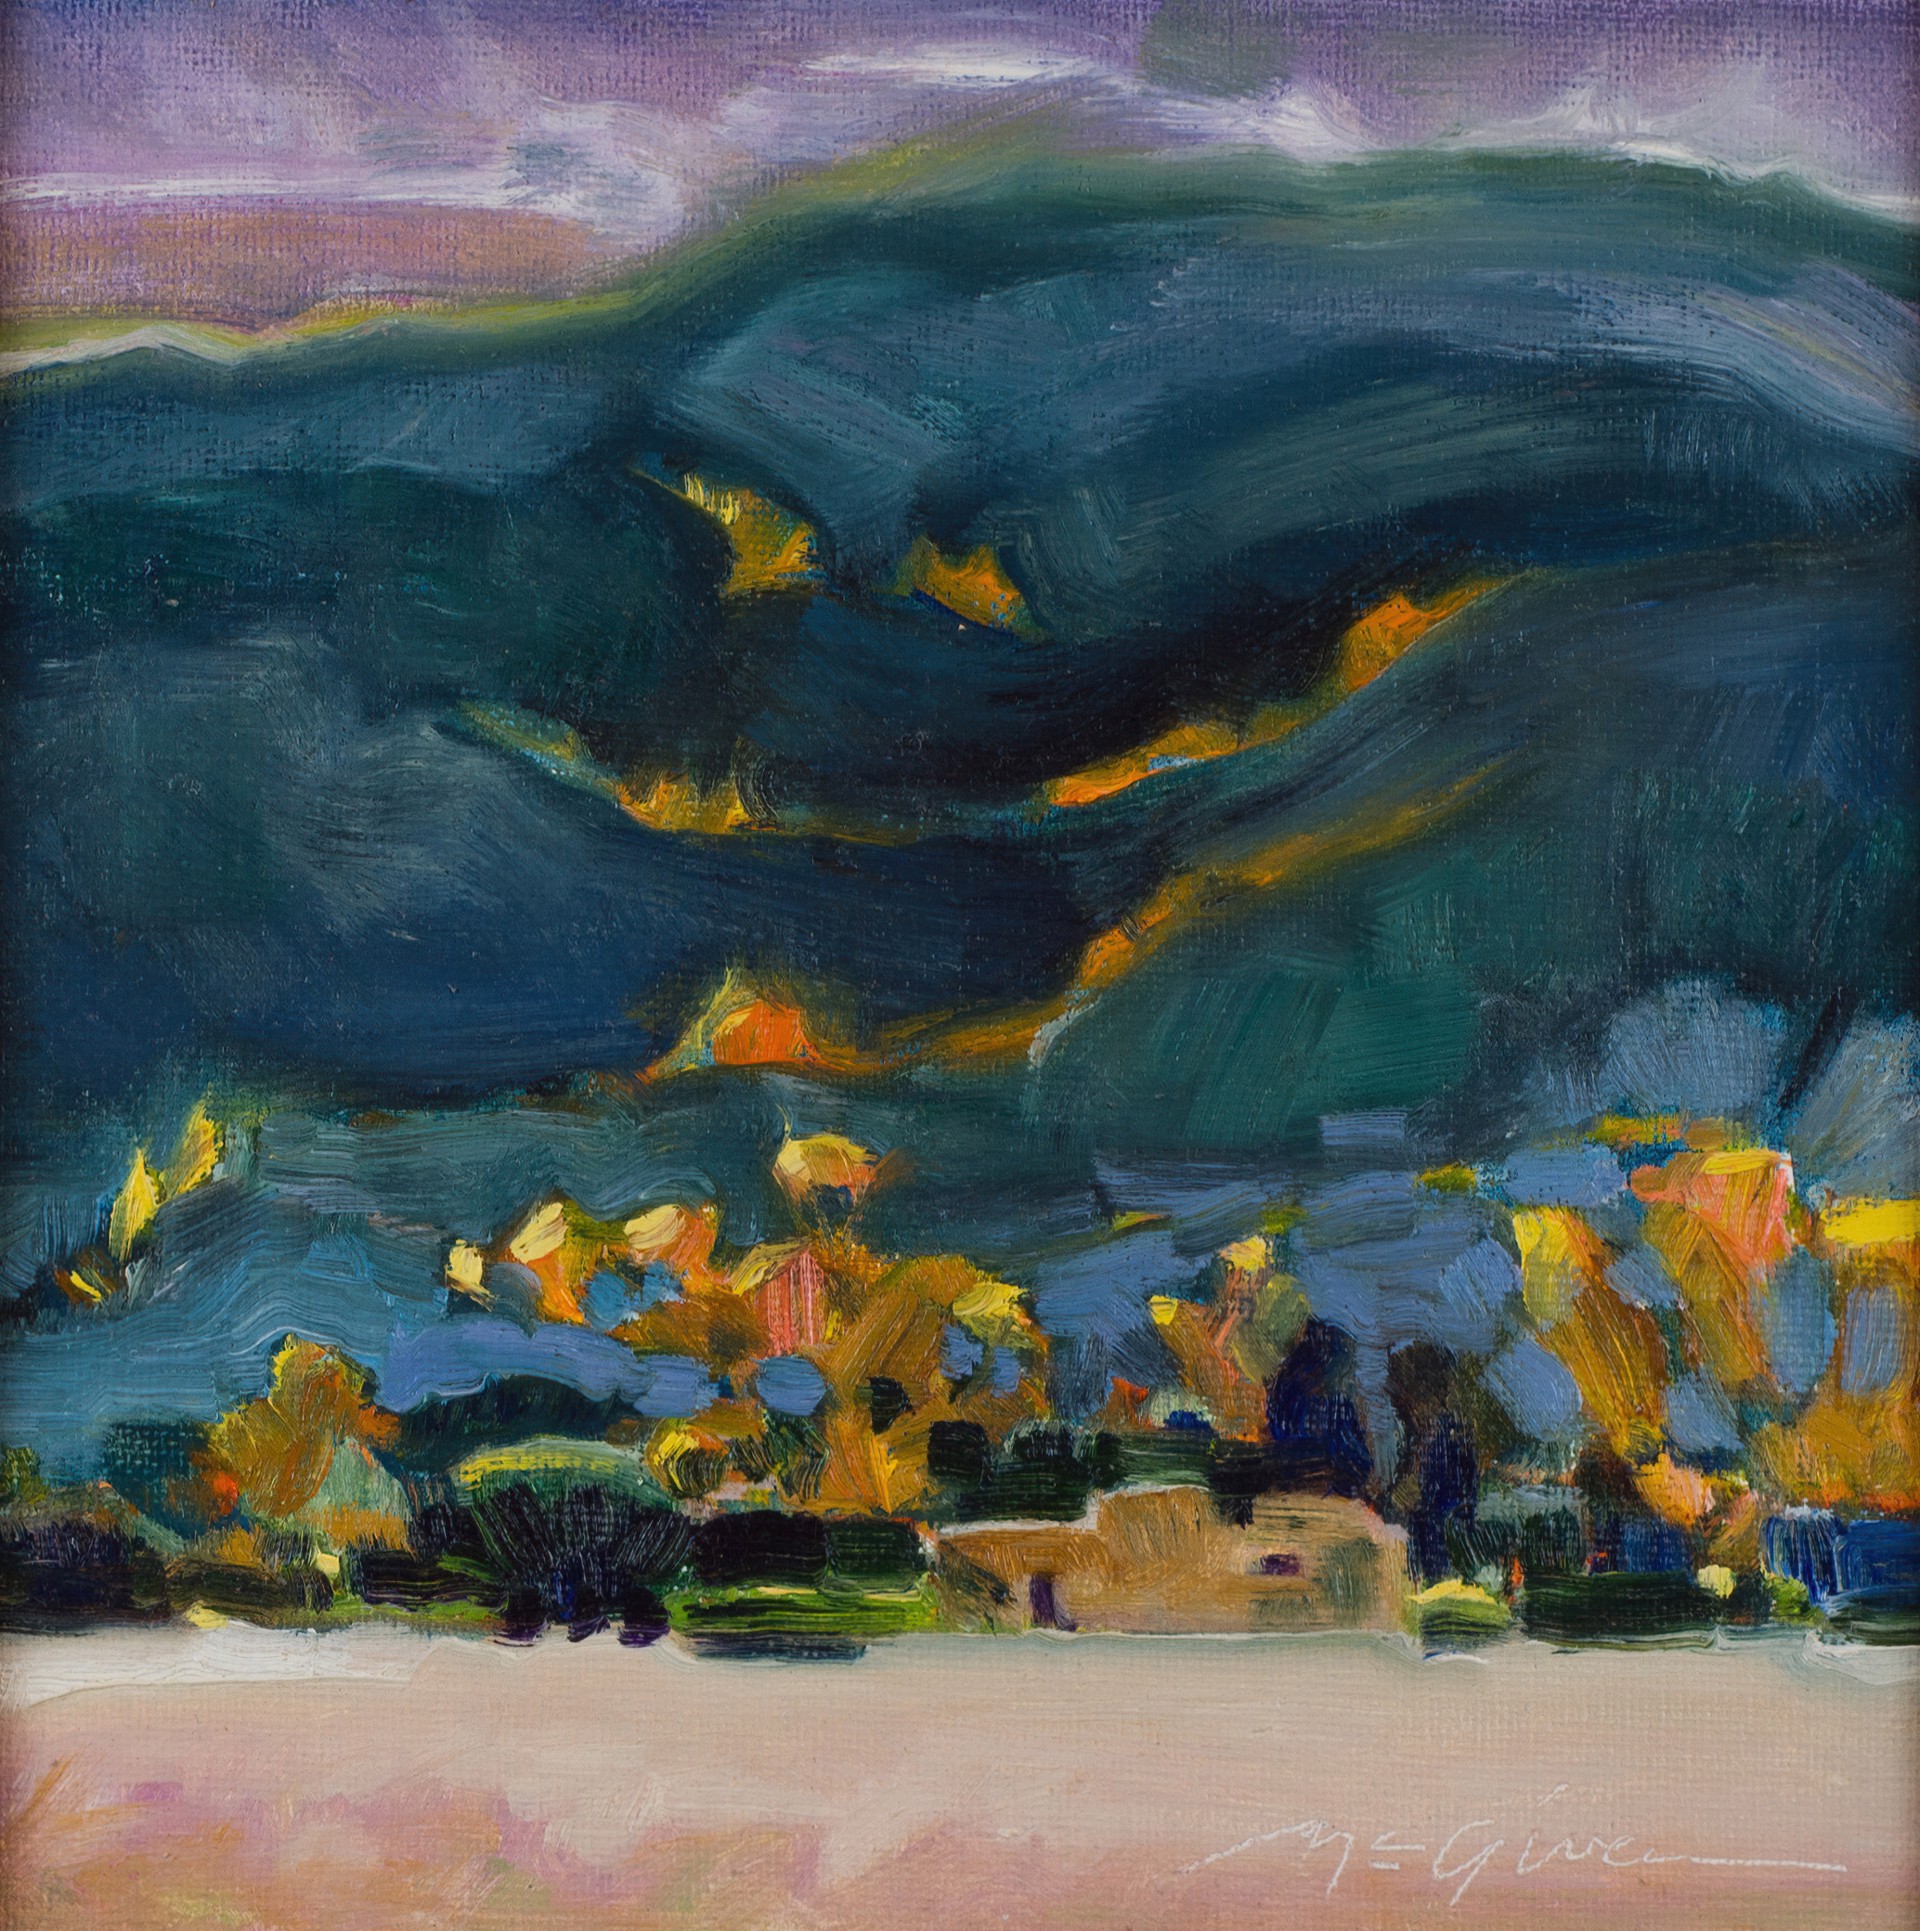 Fire on the Mountain by Peggy McGivern